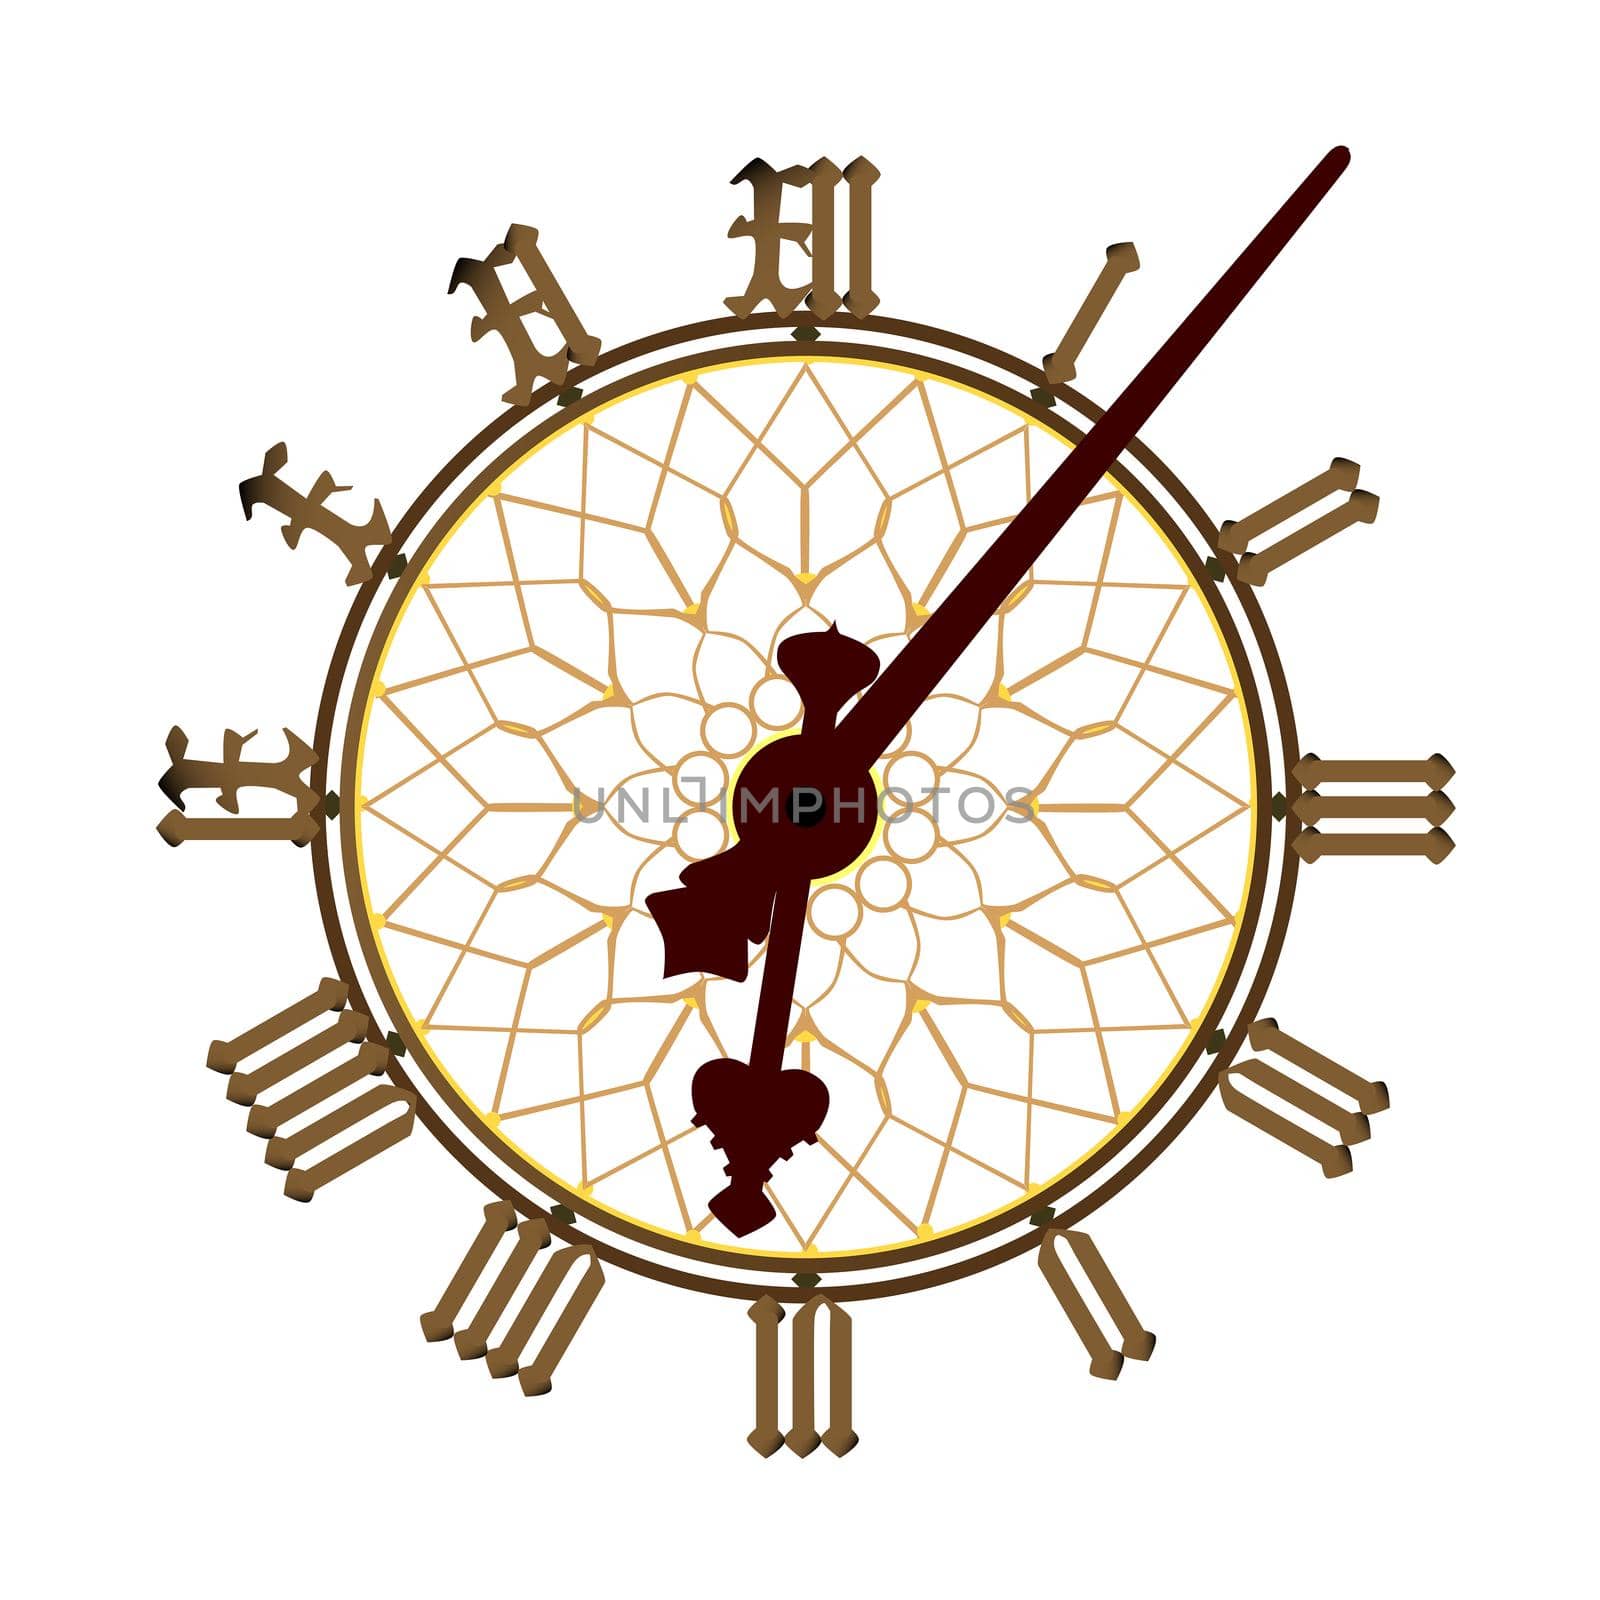 A detailed illustration of the Big Ben clock face and minute and hour hands